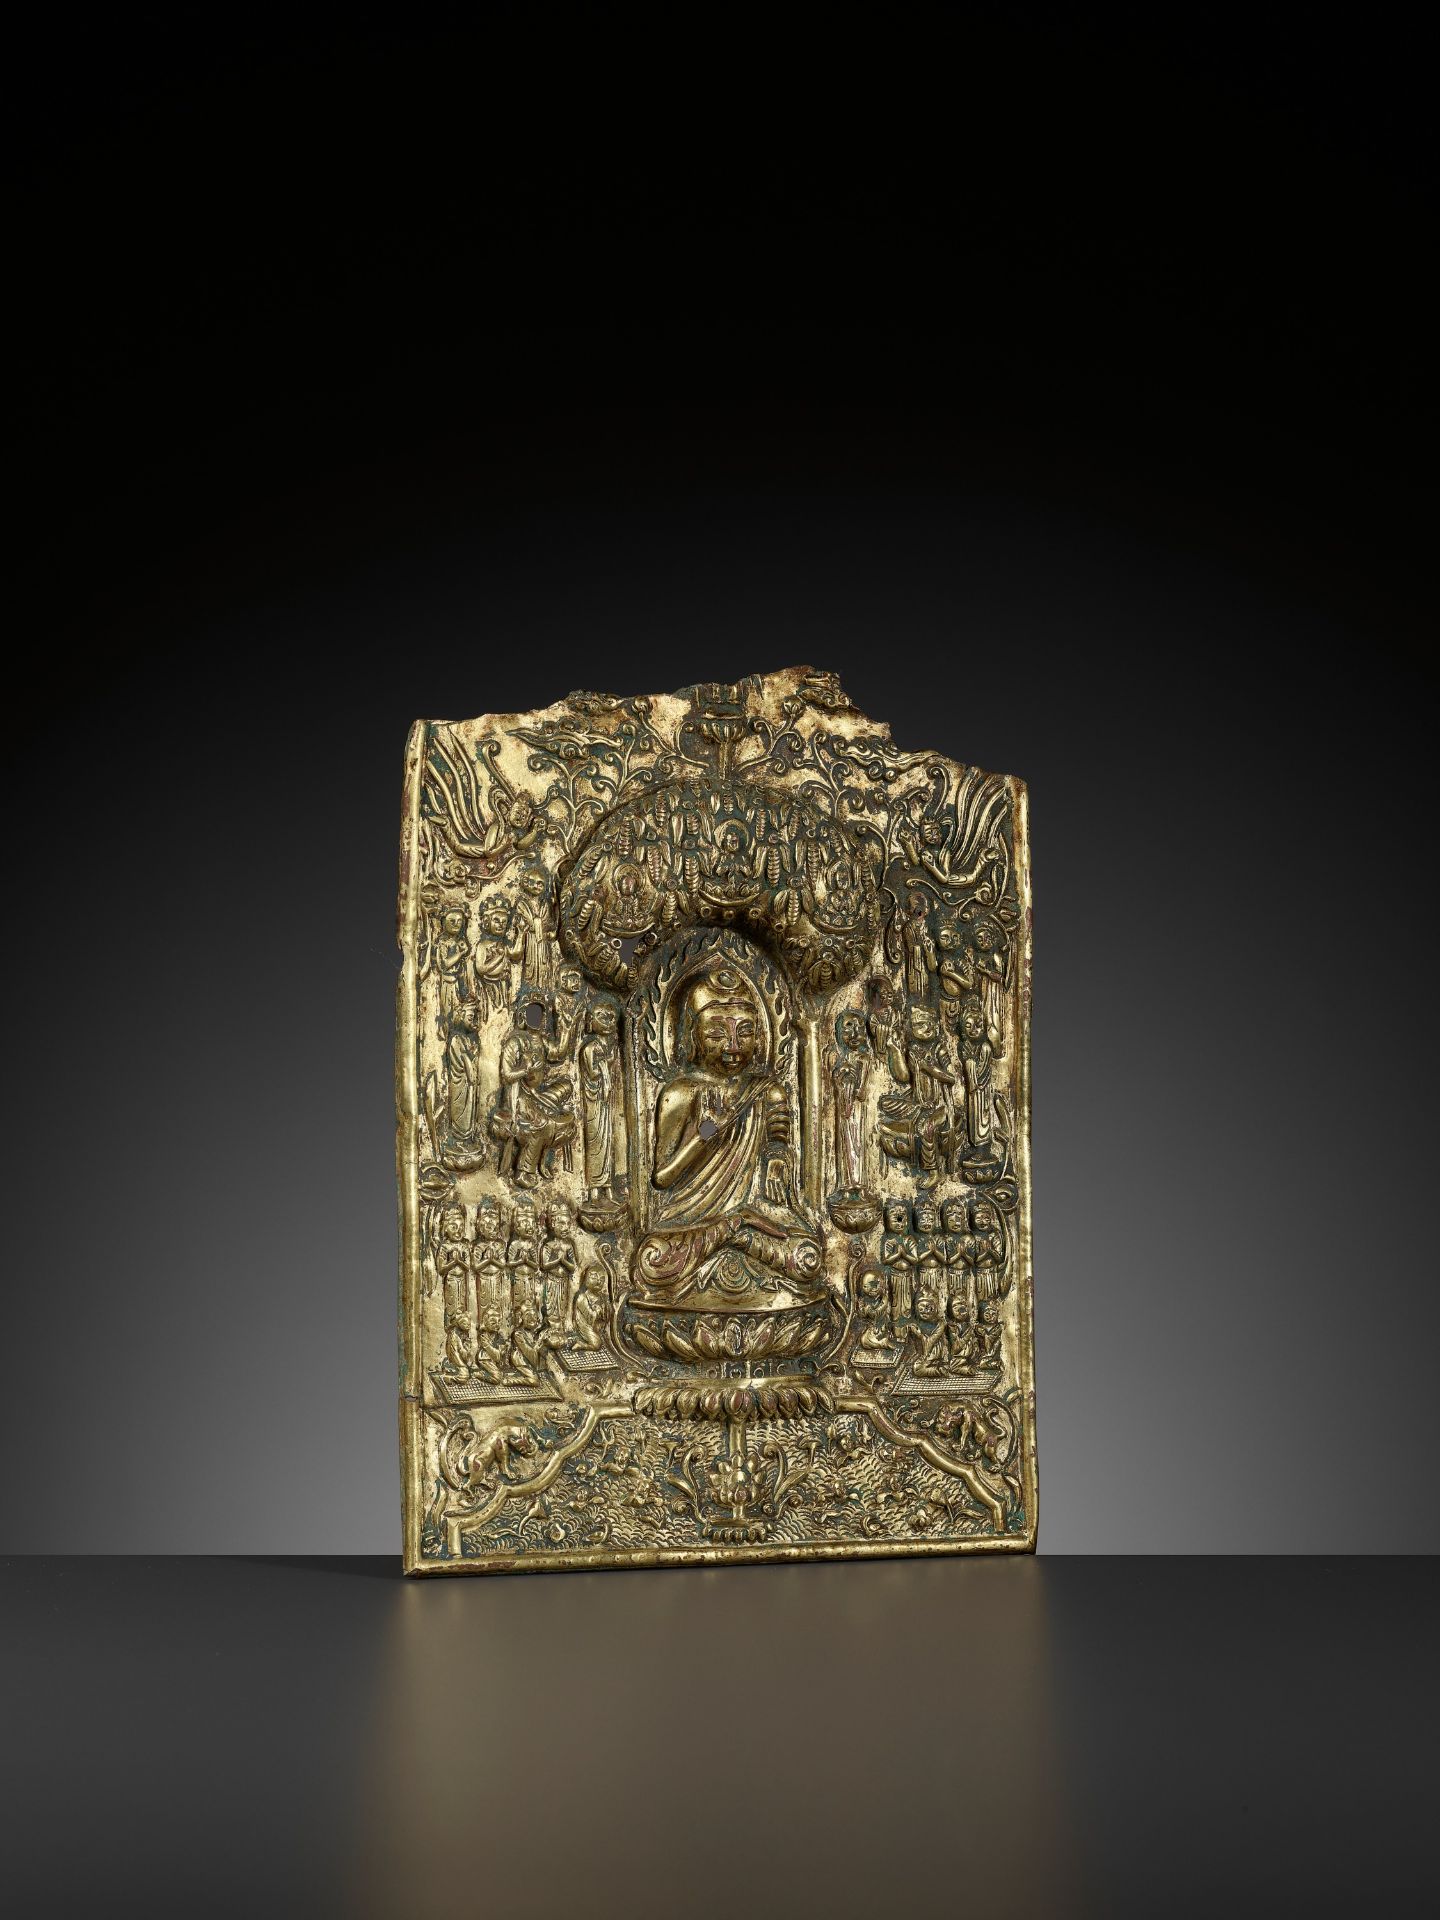 A LARGE AND IMPORTANT BUDDHIST VOTIVE PLAQUE, GILT COPPER REPOUSSE, EARLY TANG DYNASTY - Image 20 of 21